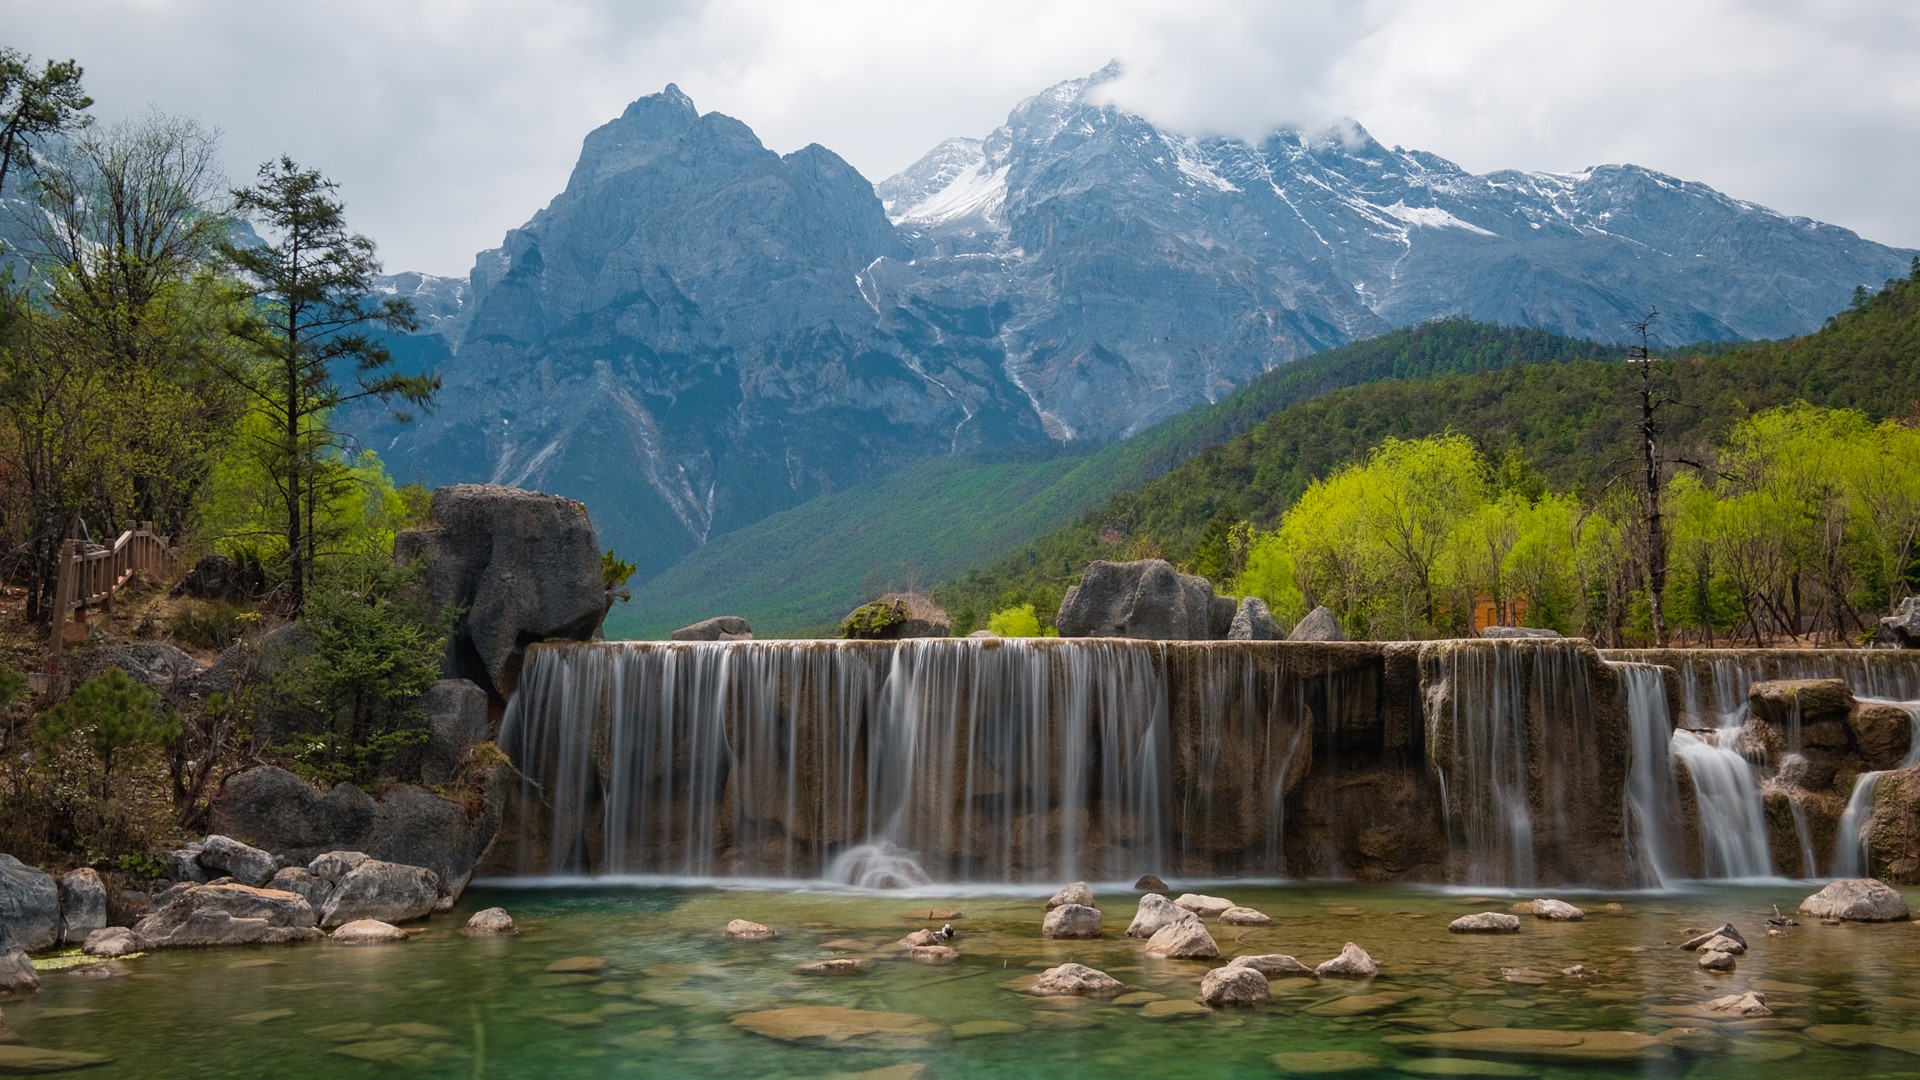 General 1920x1080 landscape nature mountains trees water snow snowy peak rocks Yunnan (China) China Blue Moon Valley waterfall